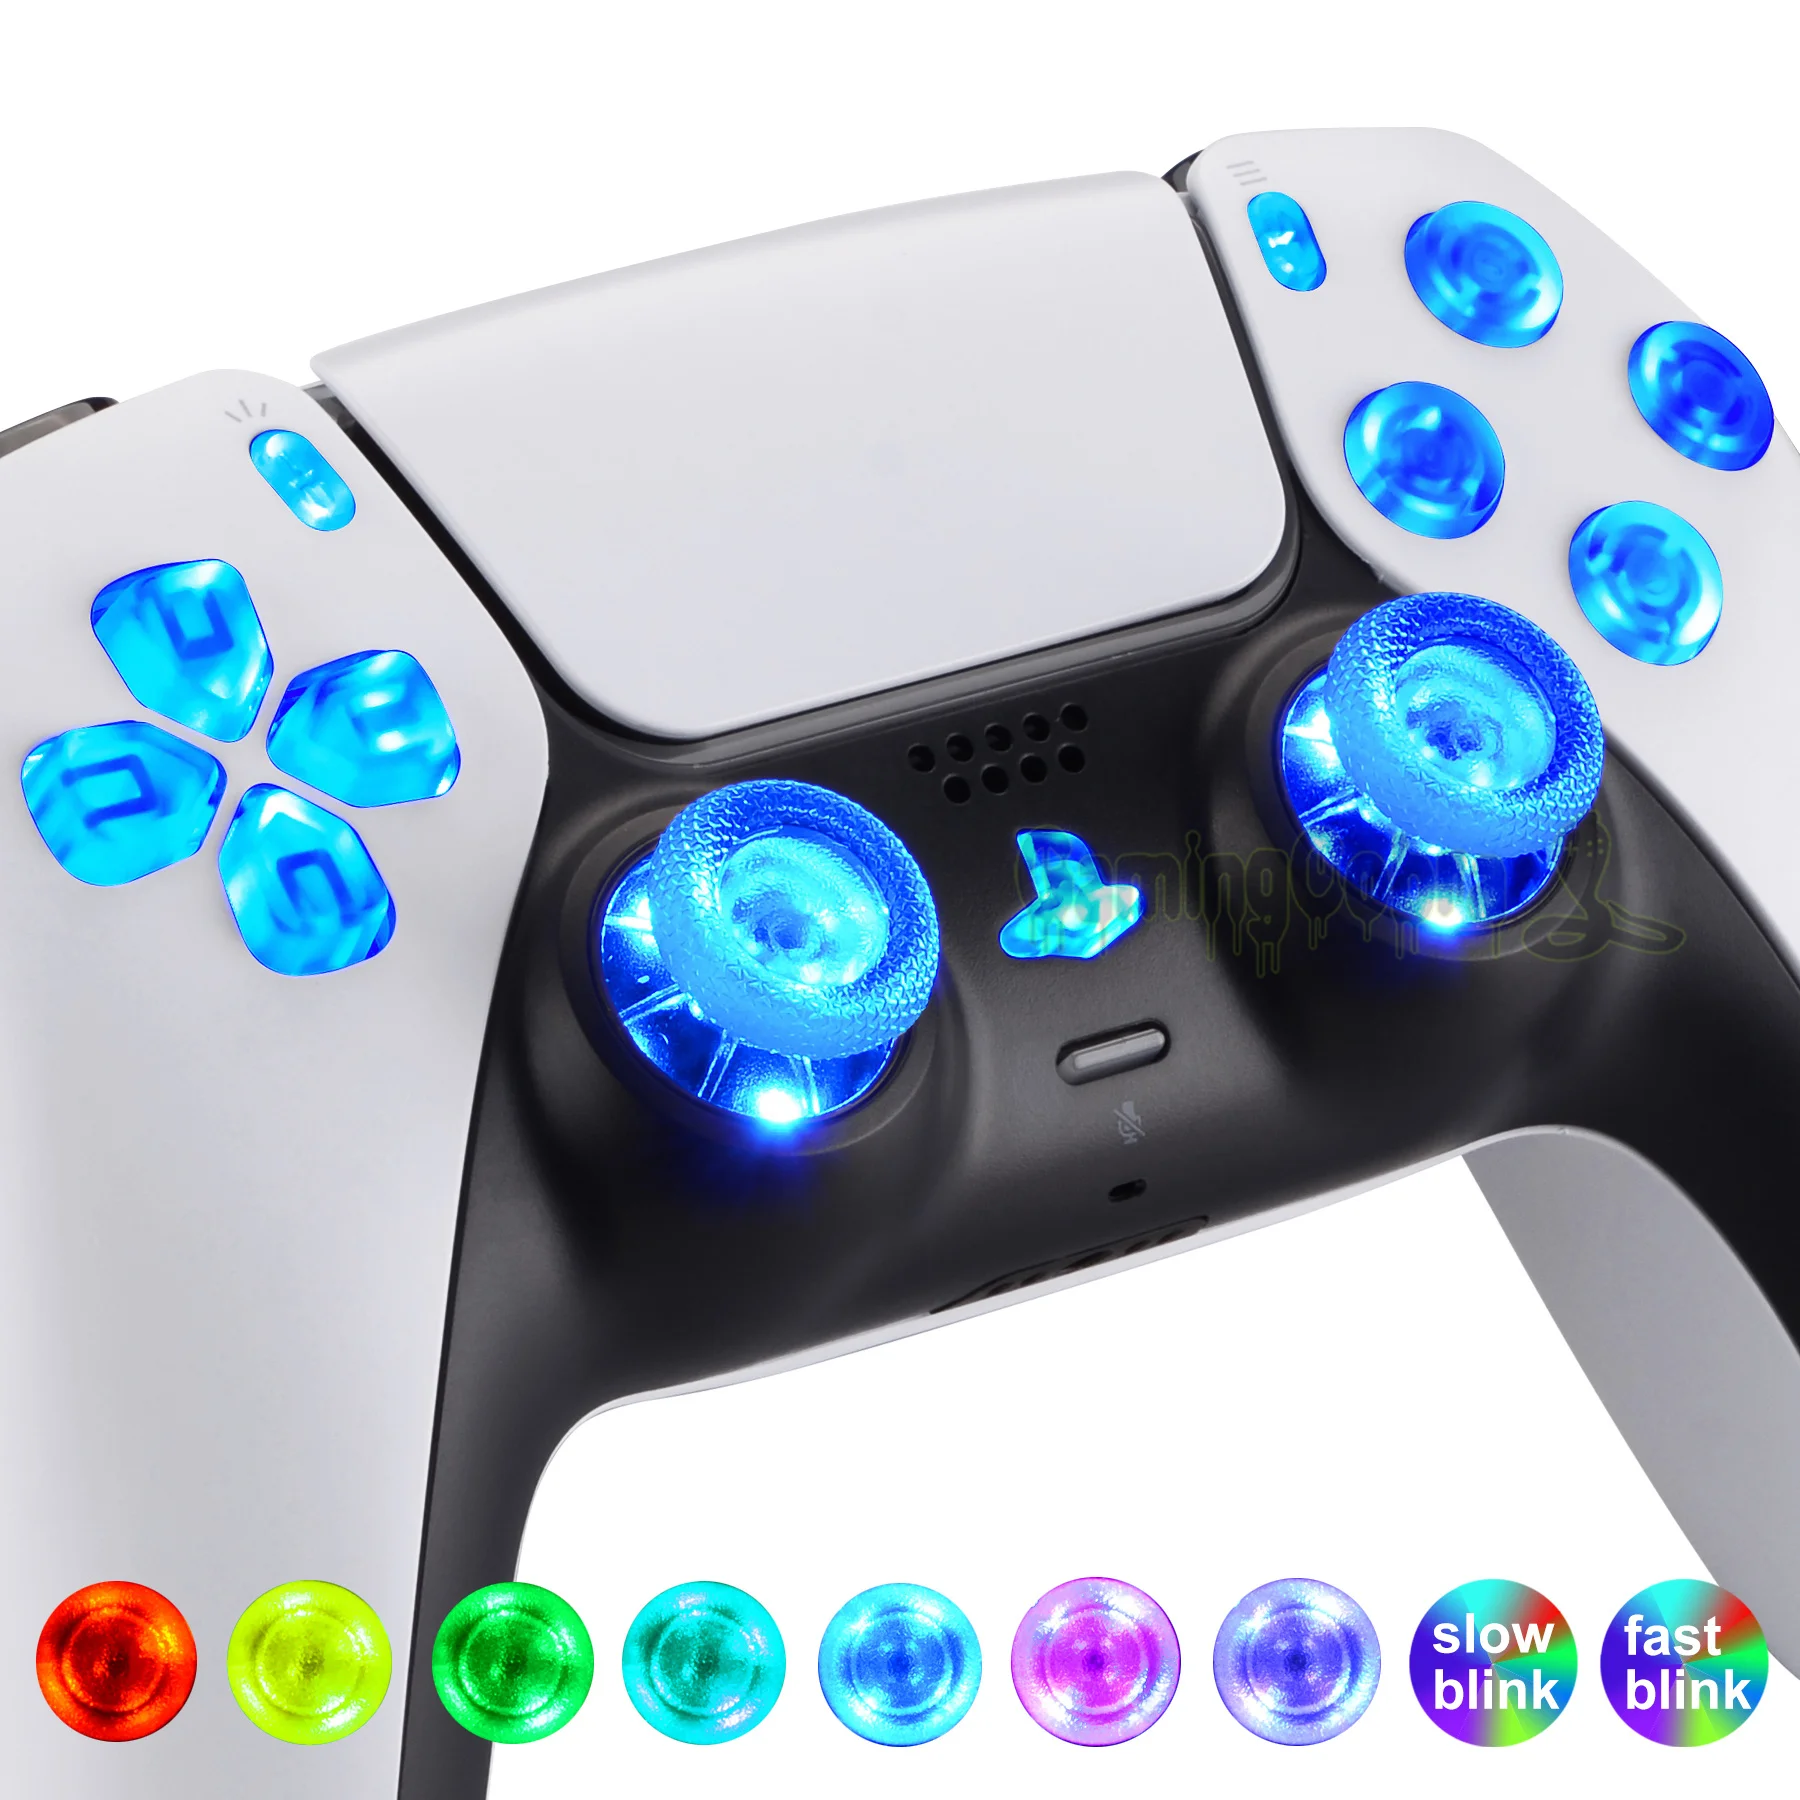 

Multi-Colors luminated D-pad Thumbstick Share Option Home Face Buttons 7 Colors 9 Modes DTF LED Kit for PS5 Controller